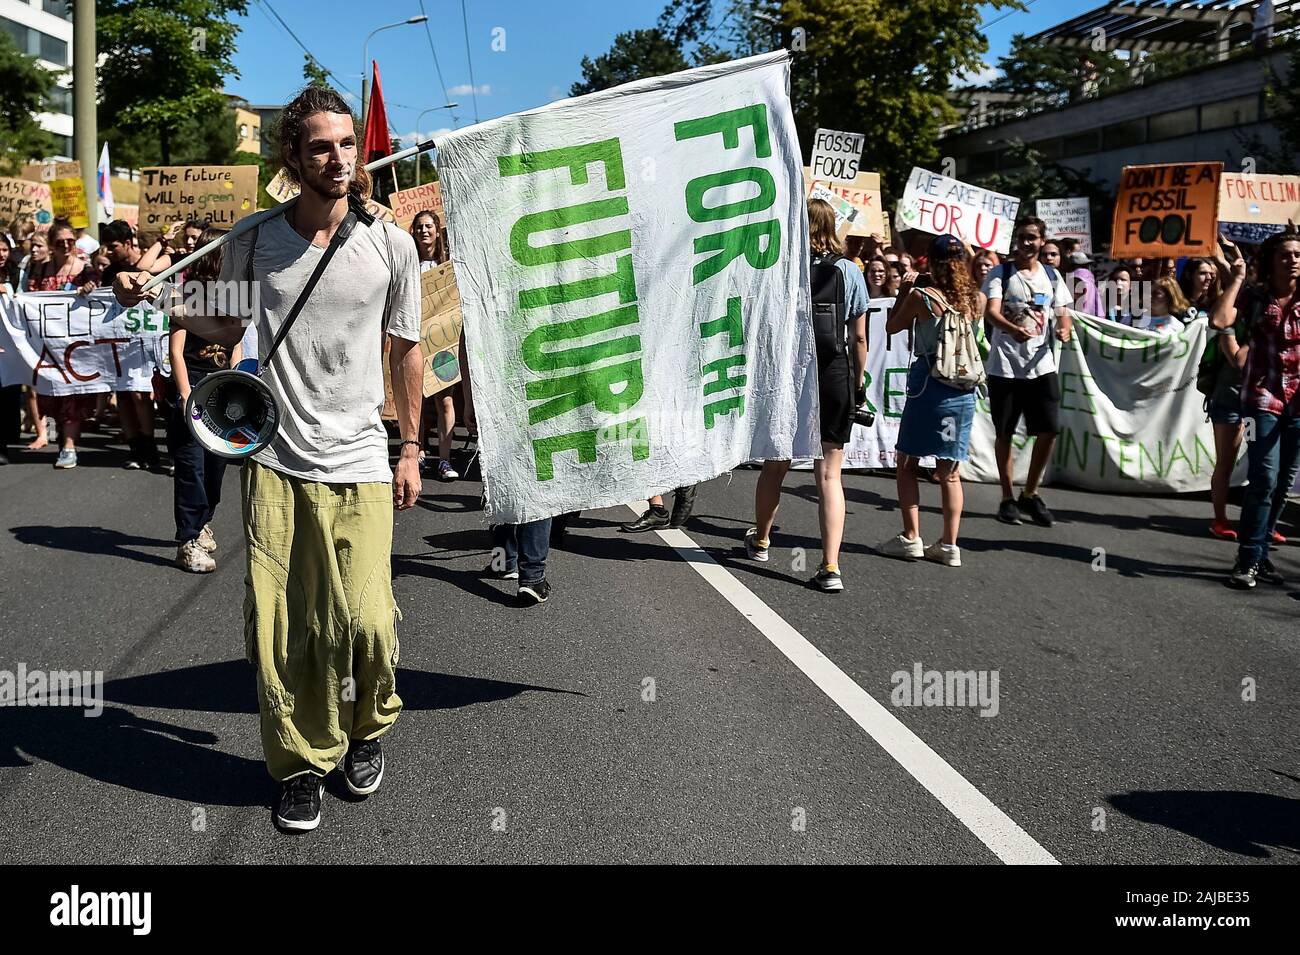 Lausanne, Switzerland - 09 August, 2019: A climate activist holds a flag reading 'For the future' during a Fridays For Future strike for climate protection that is part of 'SMILE for Future' event. More than 450 young climate activists from different European countries gathered to attend the summit 'SMILE for Future', that stands for Summer Meeting in Lausanne Europe. The aim of the summit is to reinforce the links between the participants of the European Youth Climate Strike movement and to define the future of the mobilisation against climate change. Credit: Nicolò Campo/Alamy Live News Stock Photo